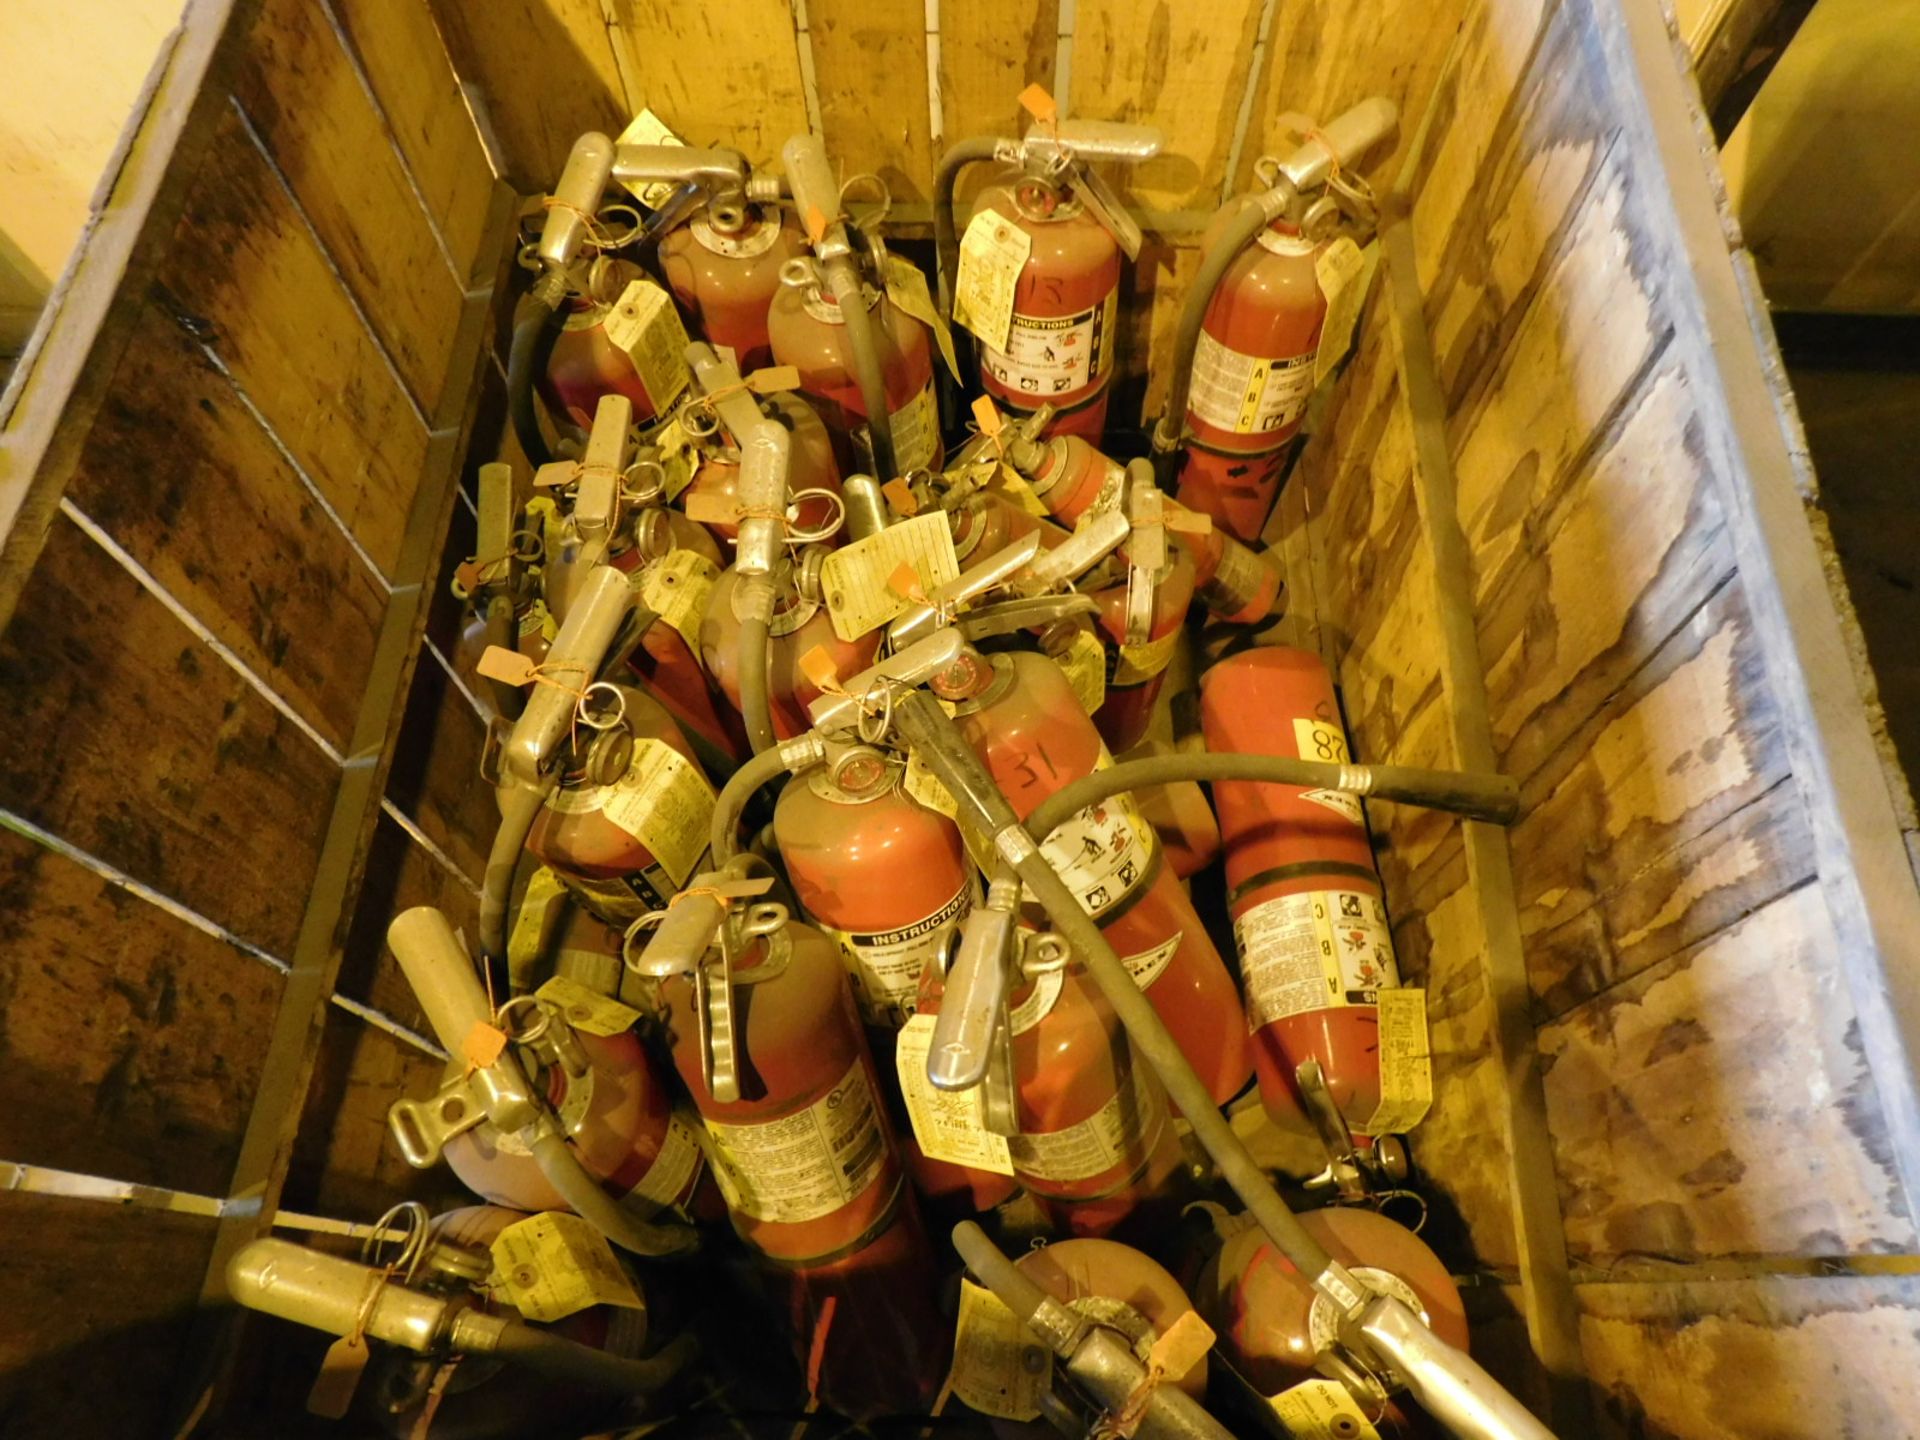 LOT - WOOD CRATE OF FIRE EXTINGUISHERS